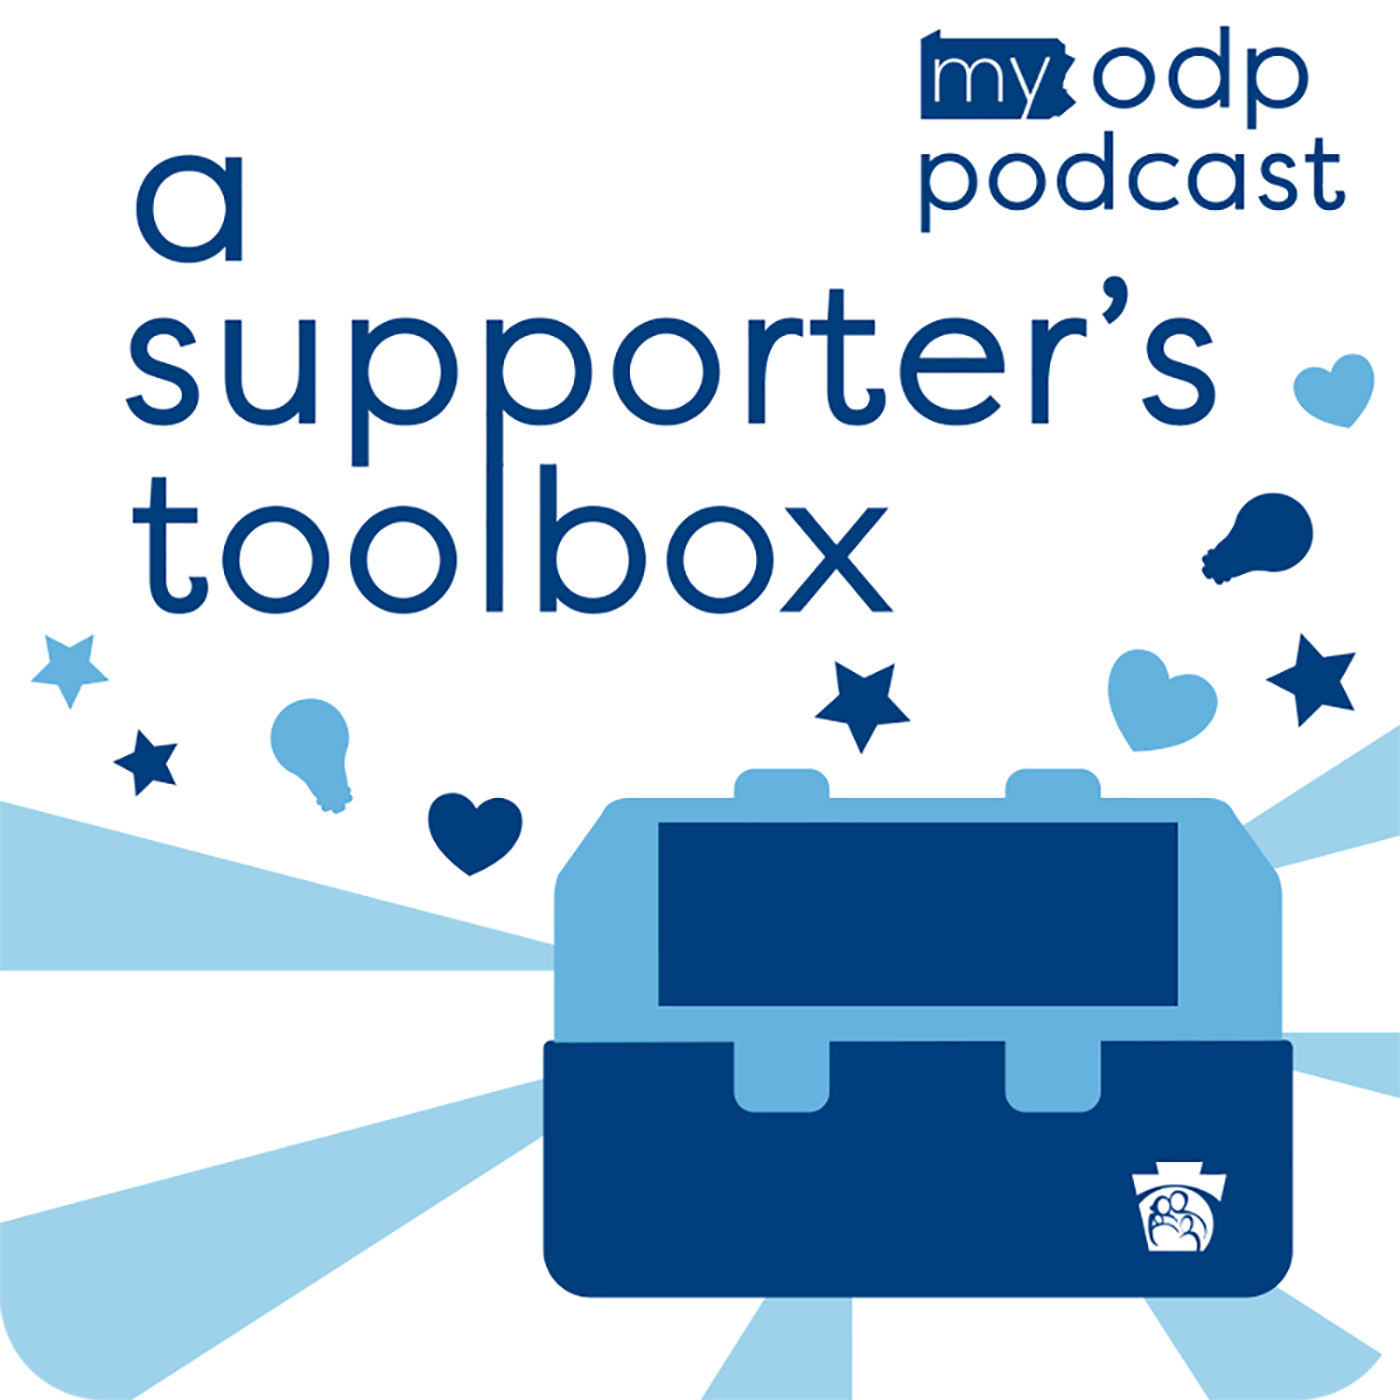 A Supporter's Toolbox